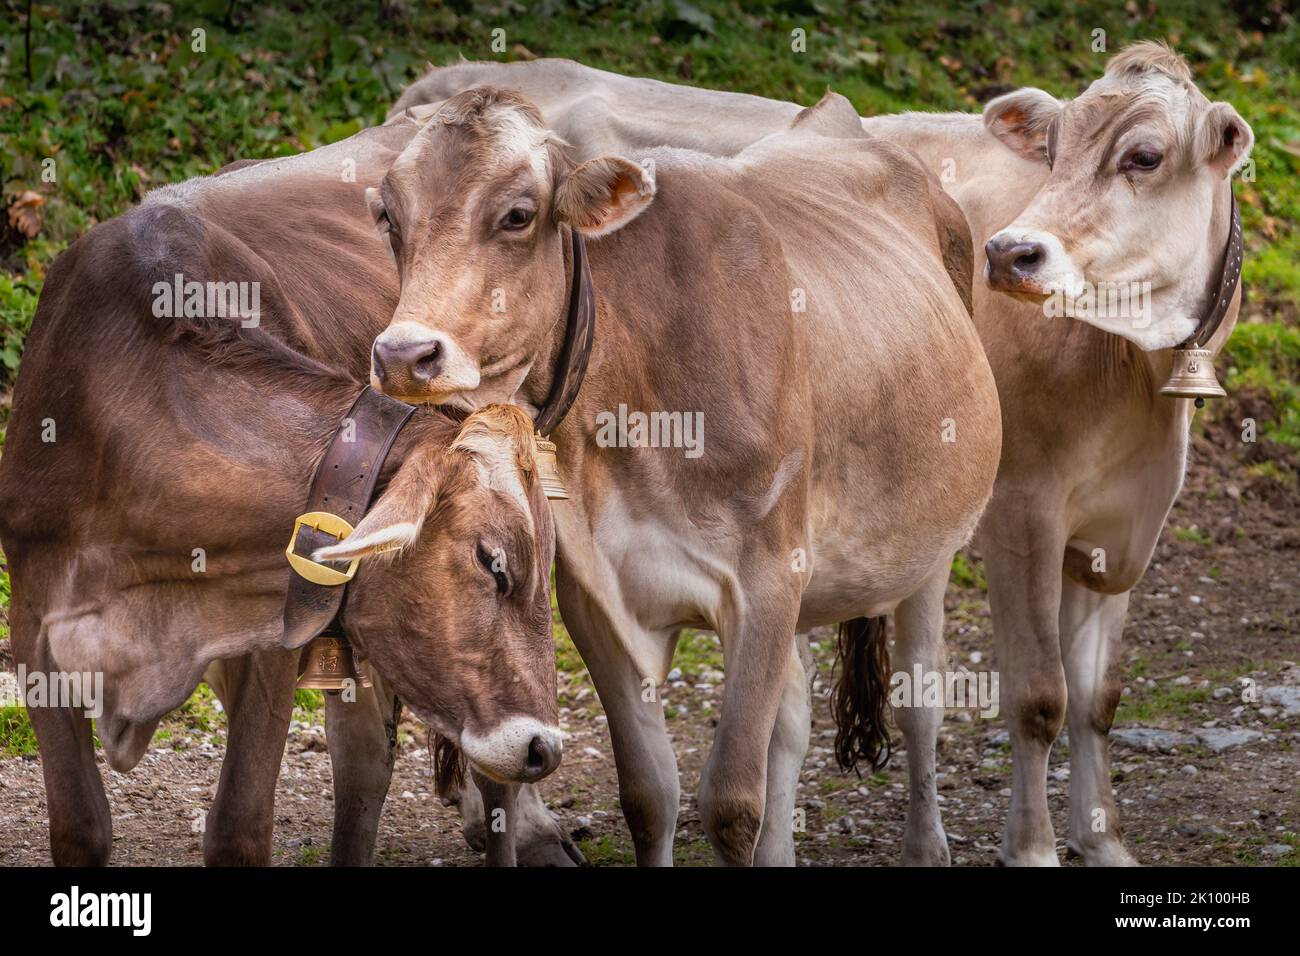 Swiss cows in the alpine landscape, Gran Paradiso, Northern Italy Stock Photo